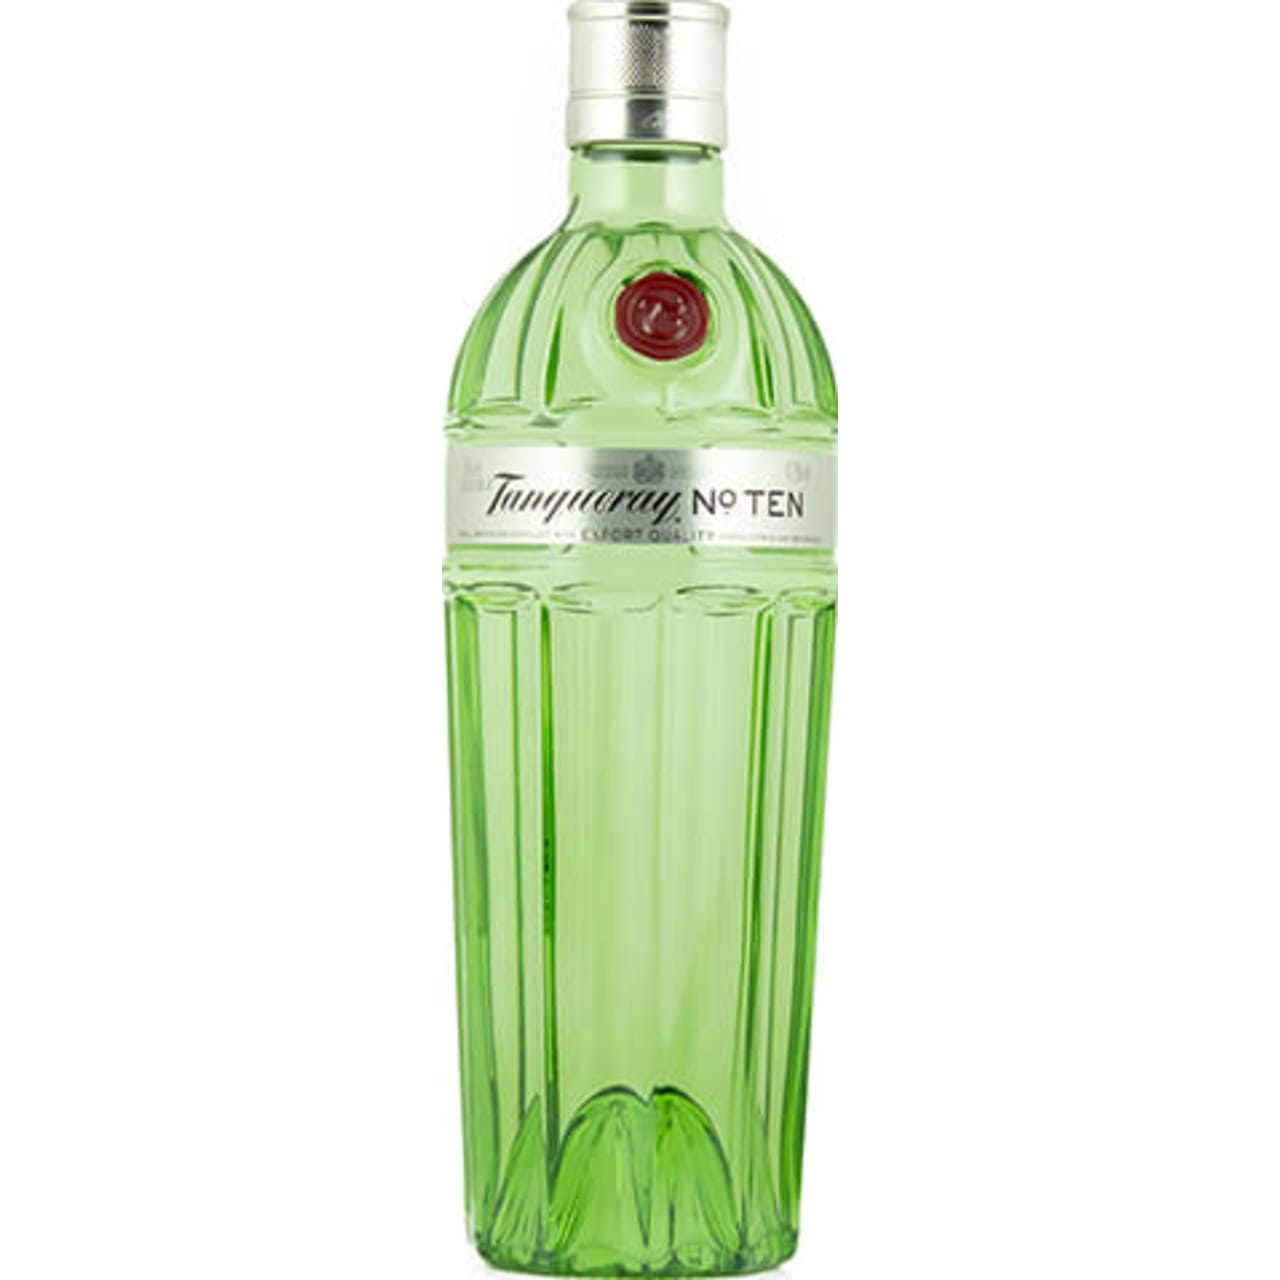 Tanqueray No. Ten Gin is distilled four times with Tanqueray's standard gin botanicals of refreshing juniper, peppery coriander, aromatic angelica and sweet liquorice.